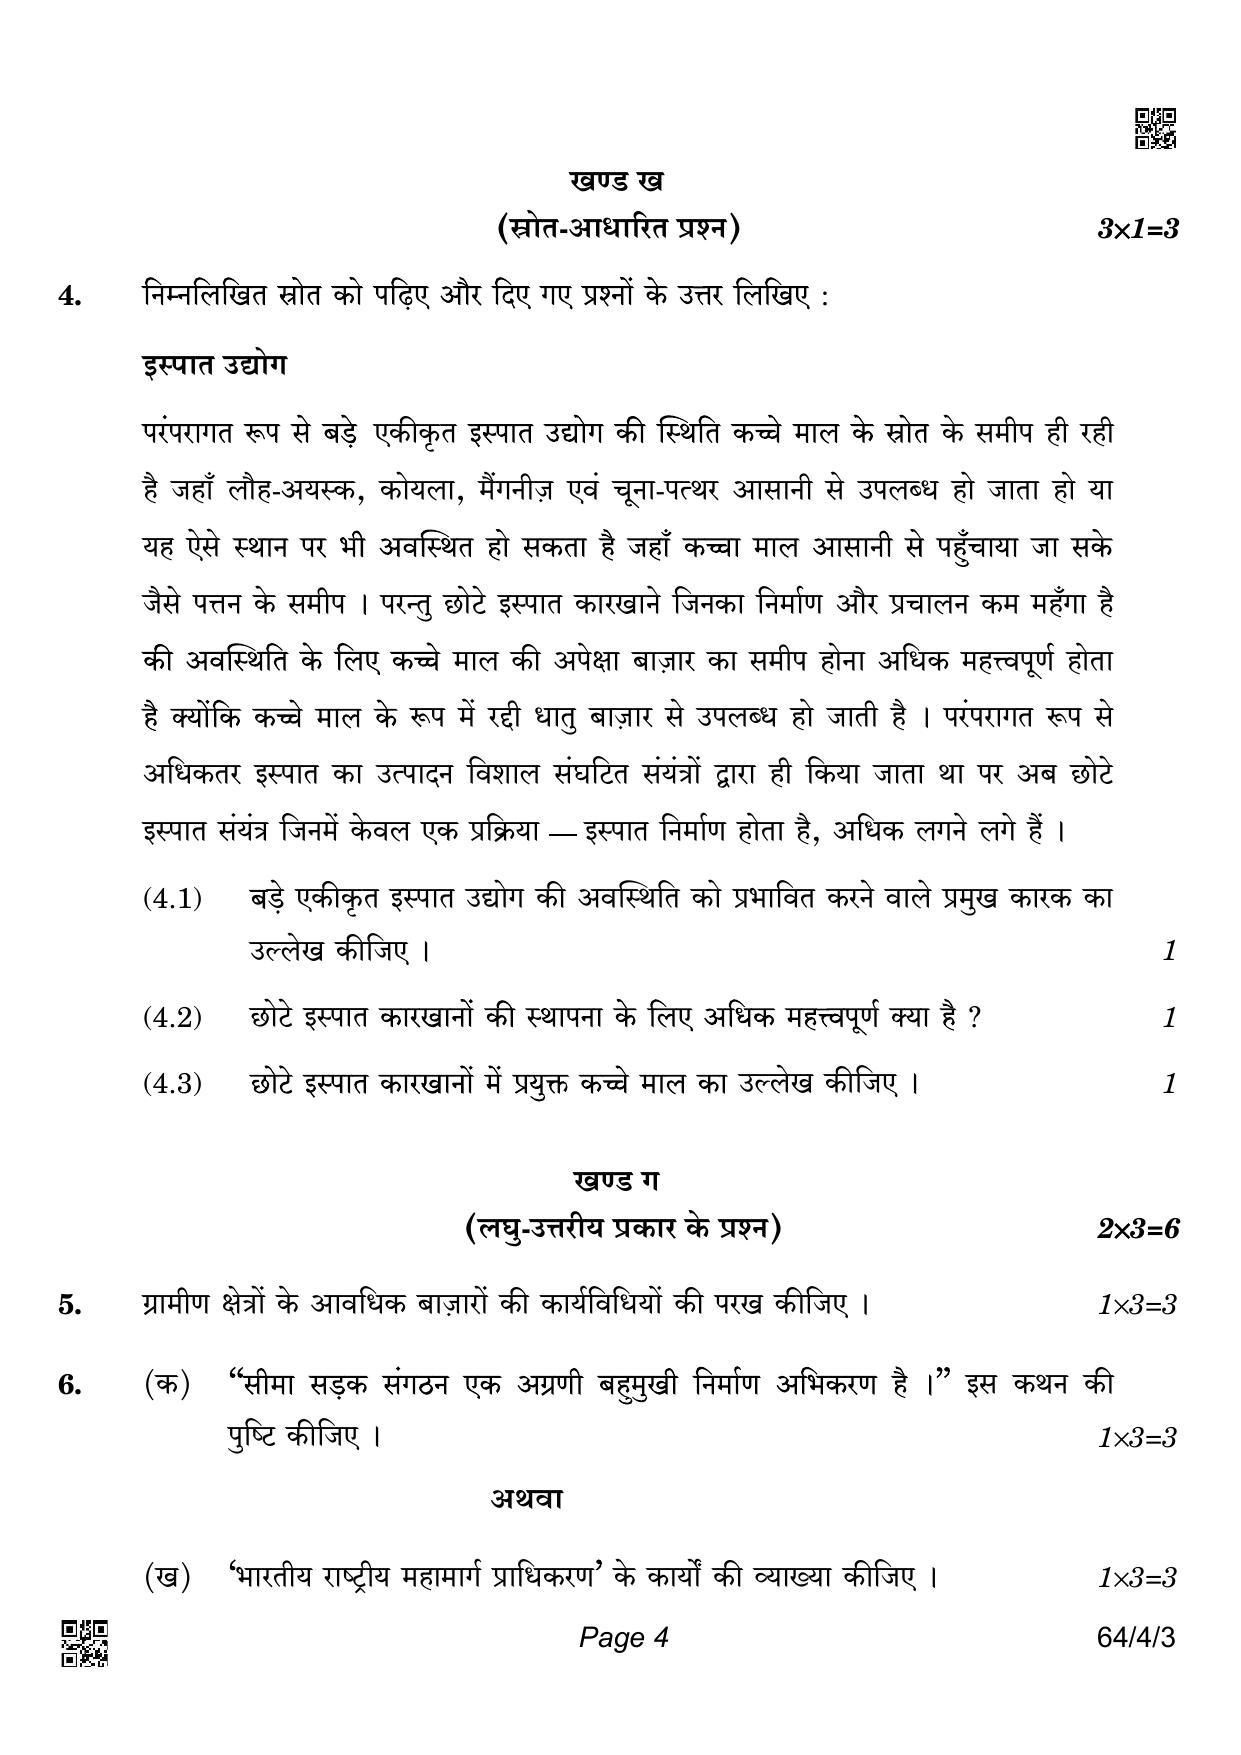 CBSE Class 12 64-4-3 Geography 2022 Question Paper - Page 4